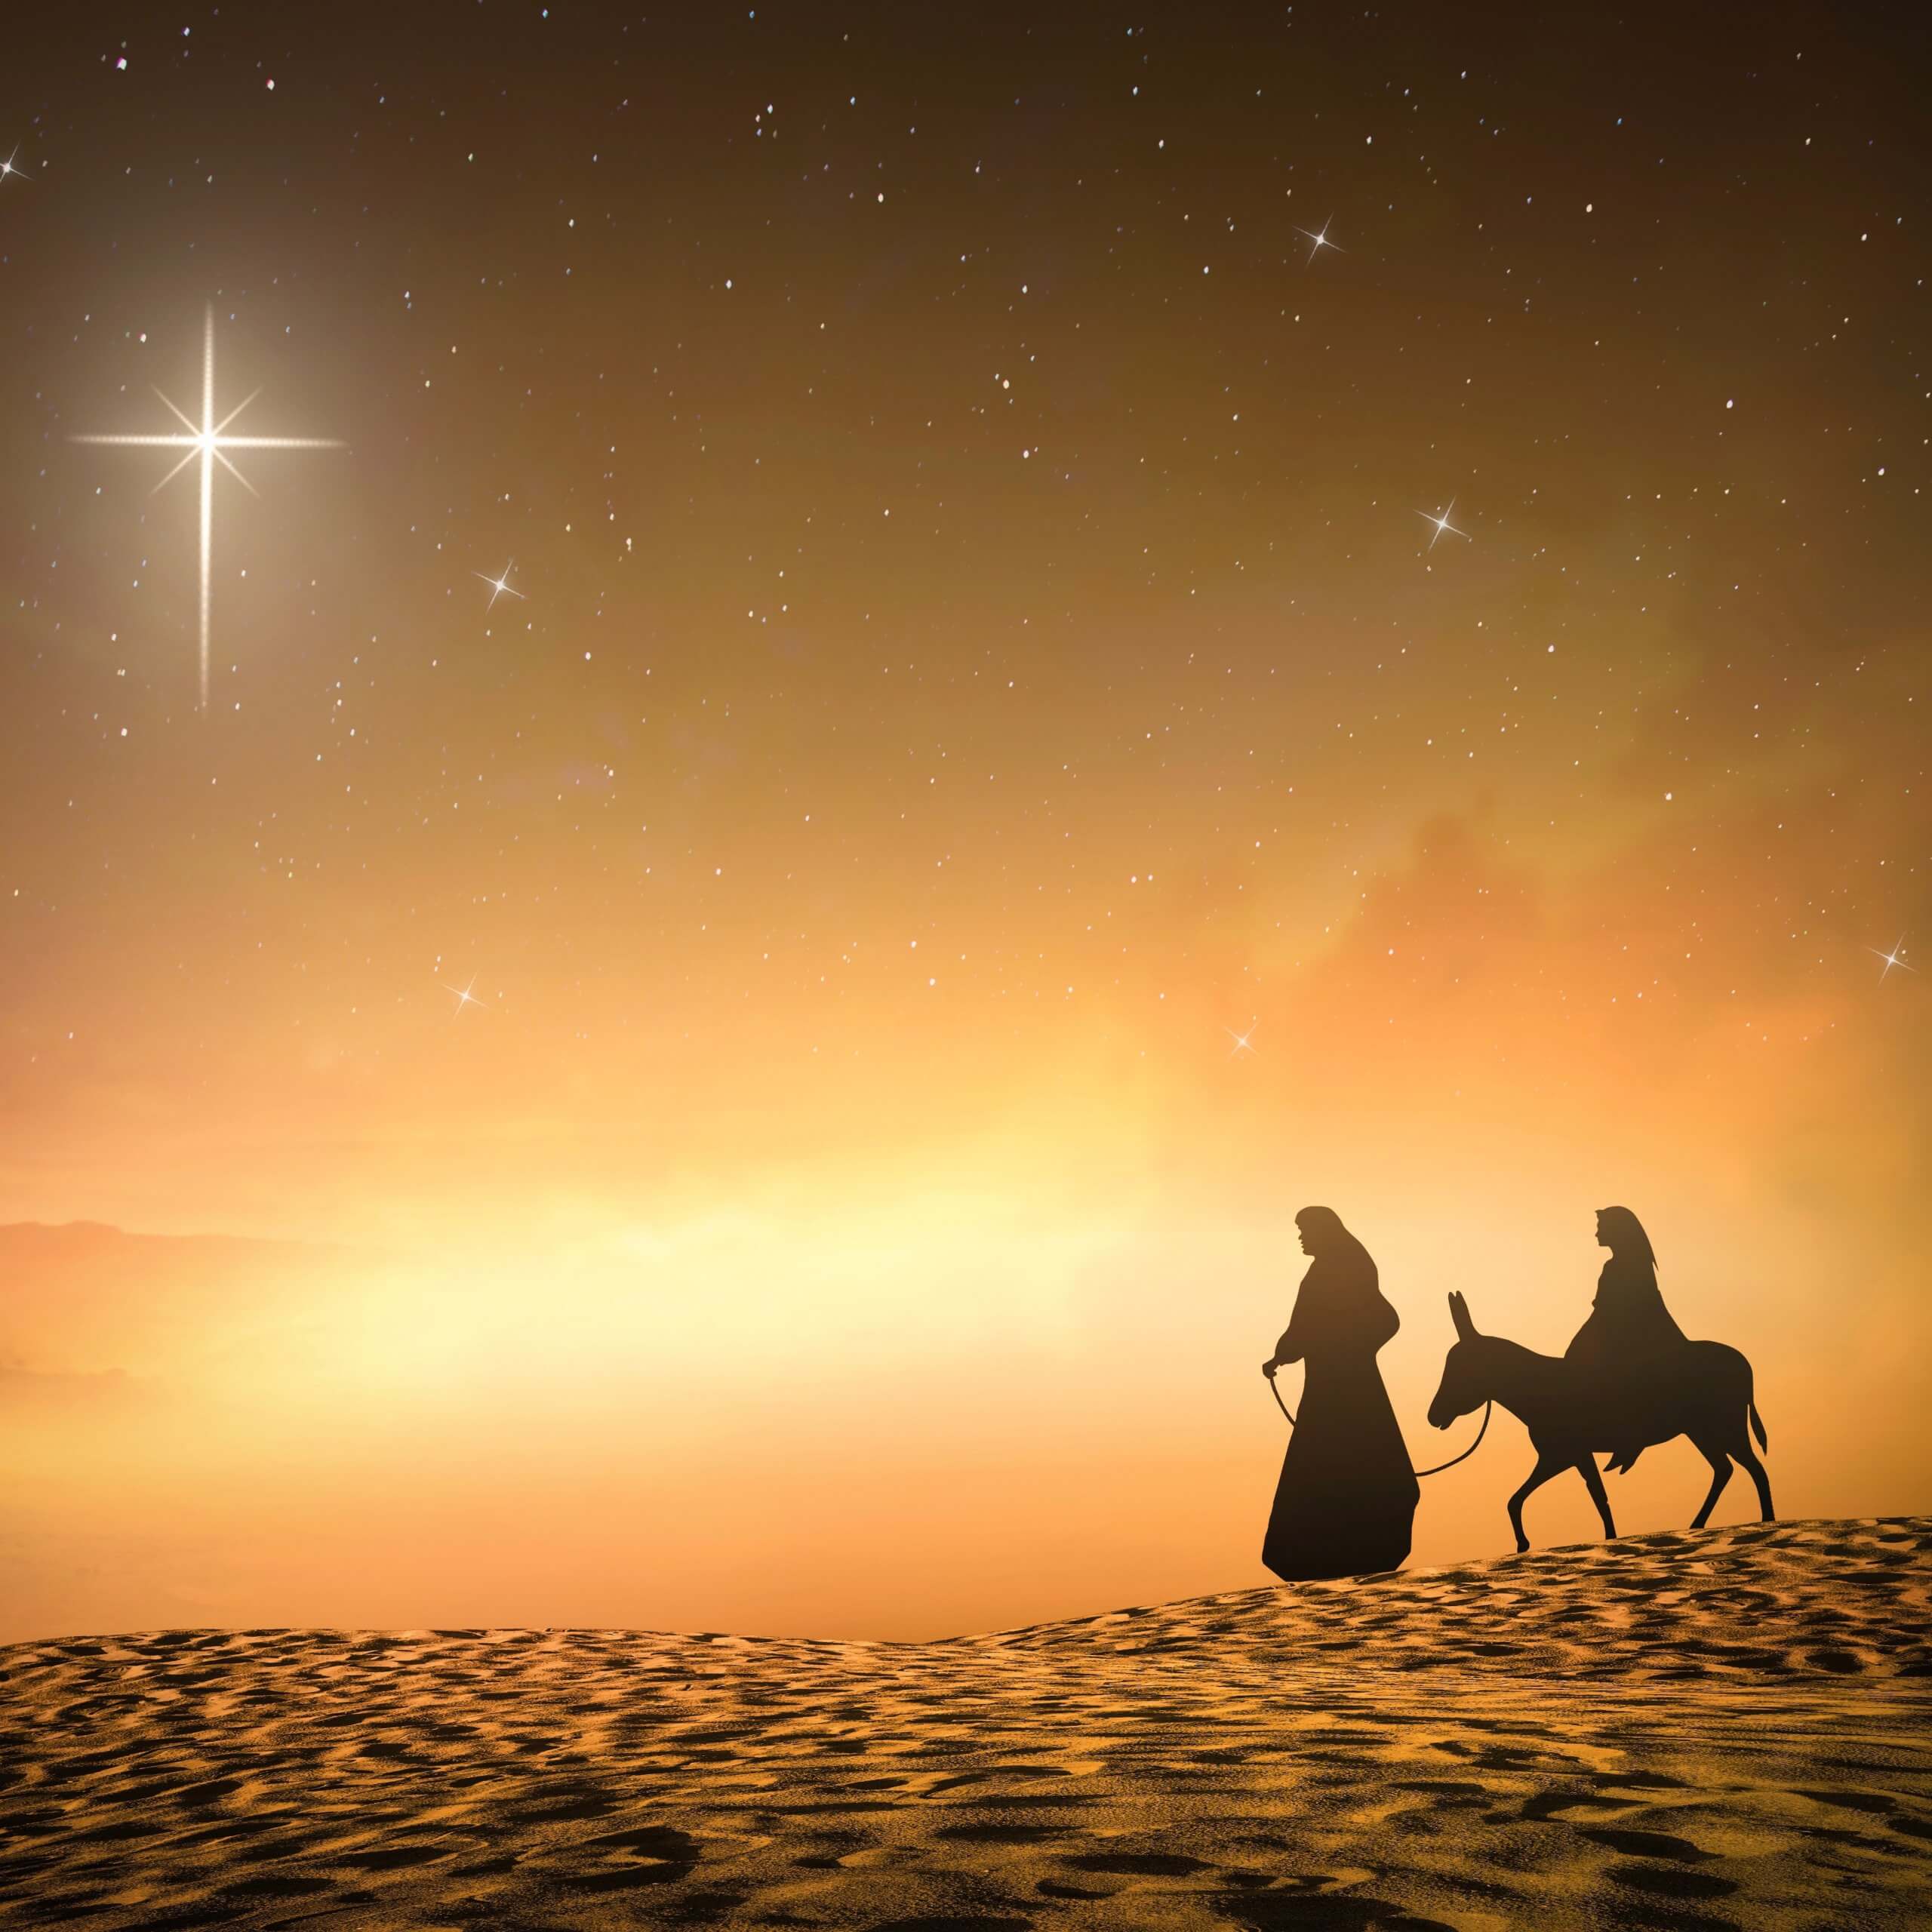 mary on a donkey and joseph leading her with the star of jesus in the sky